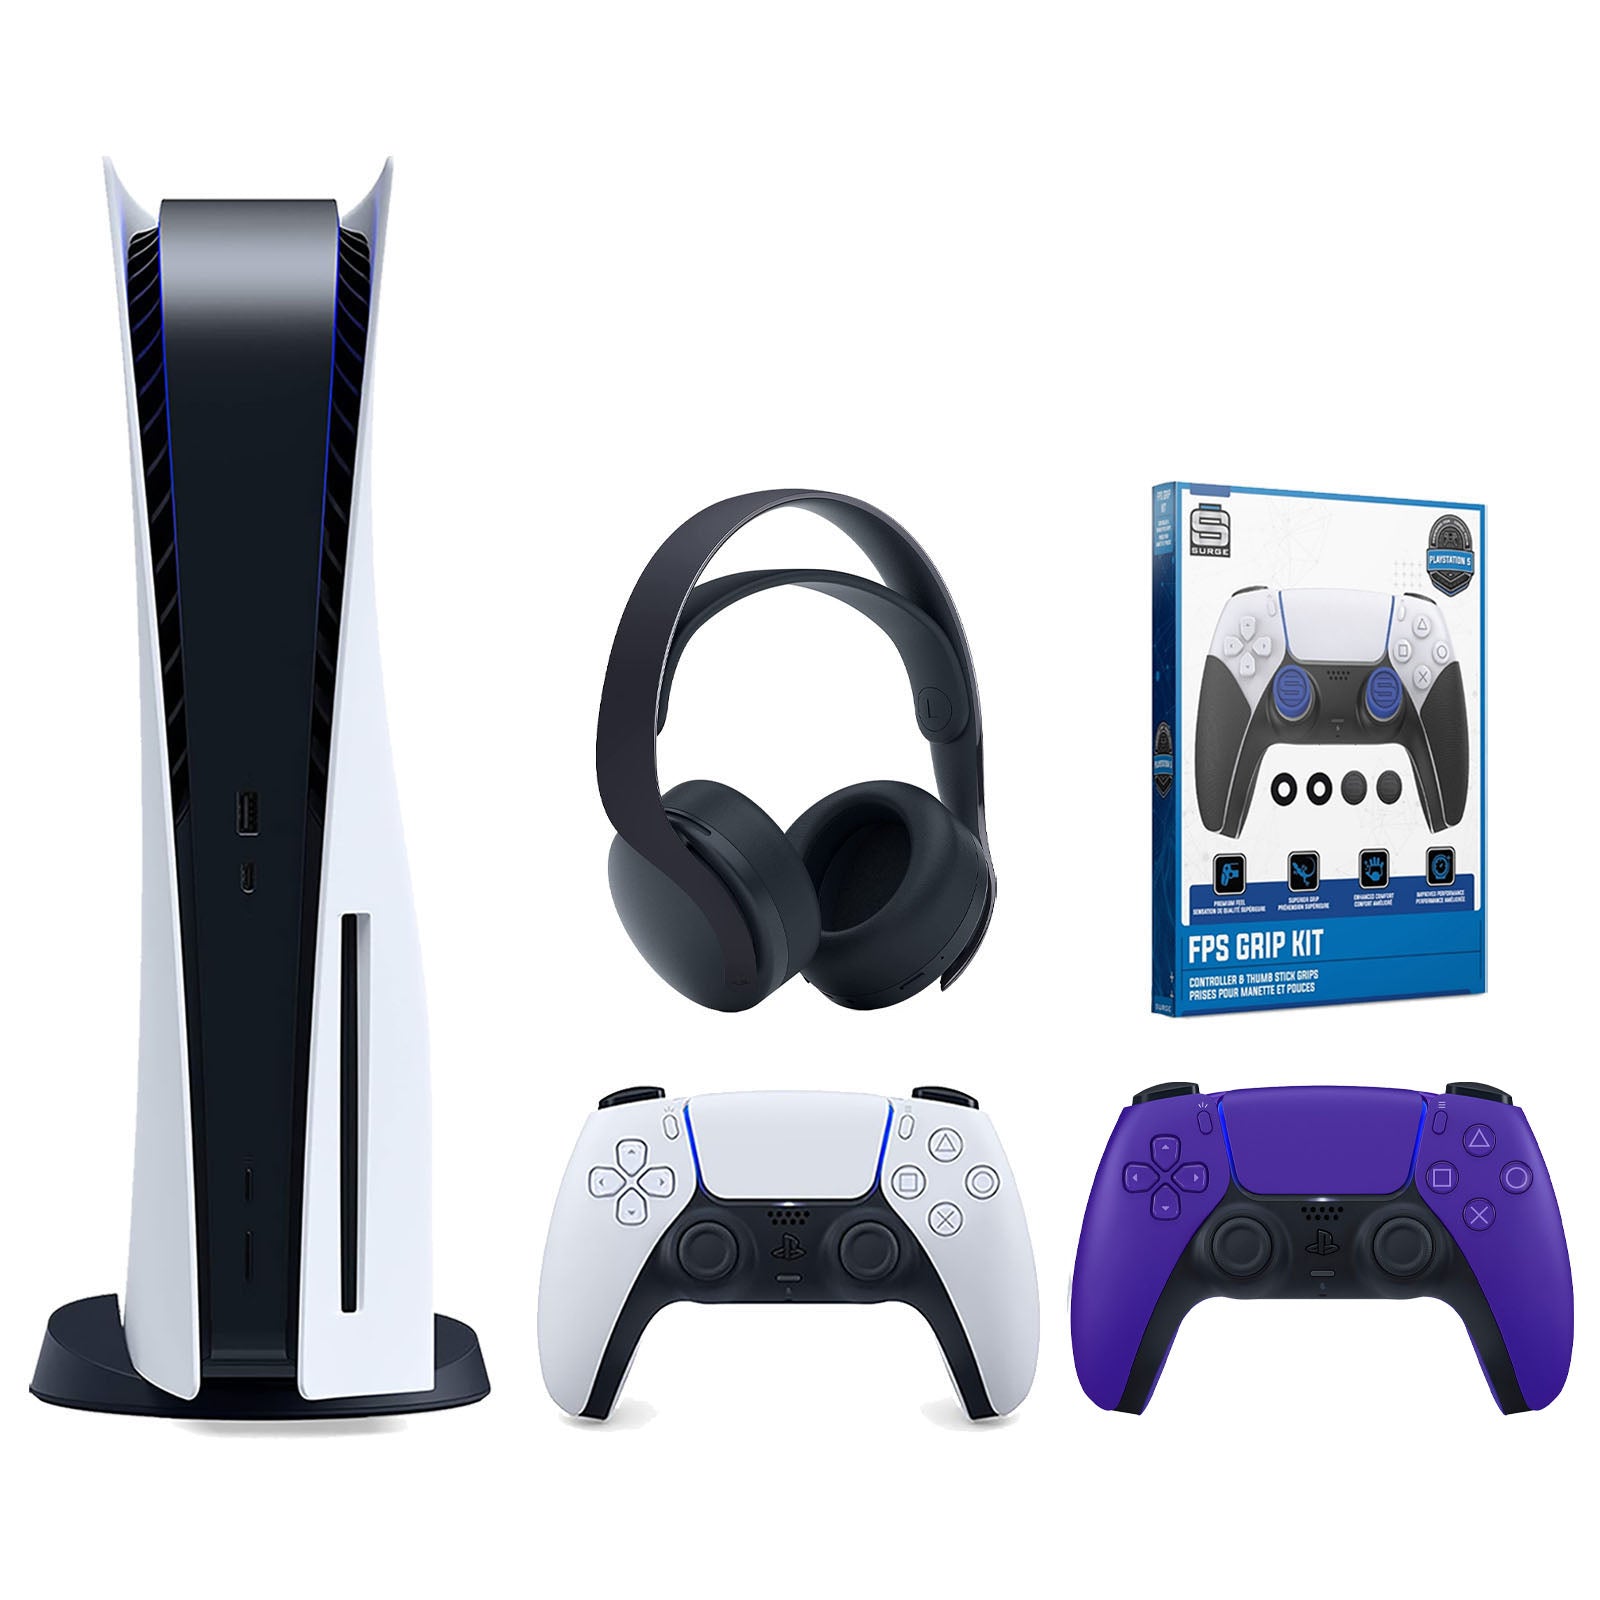 Sony Playstation 5 Disc Version Console with Extra Purple Controller, Black PULSE 3D Headset and Surge FPS Grip Kit With Precision Aiming Rings Bundle - Pro-Distributing